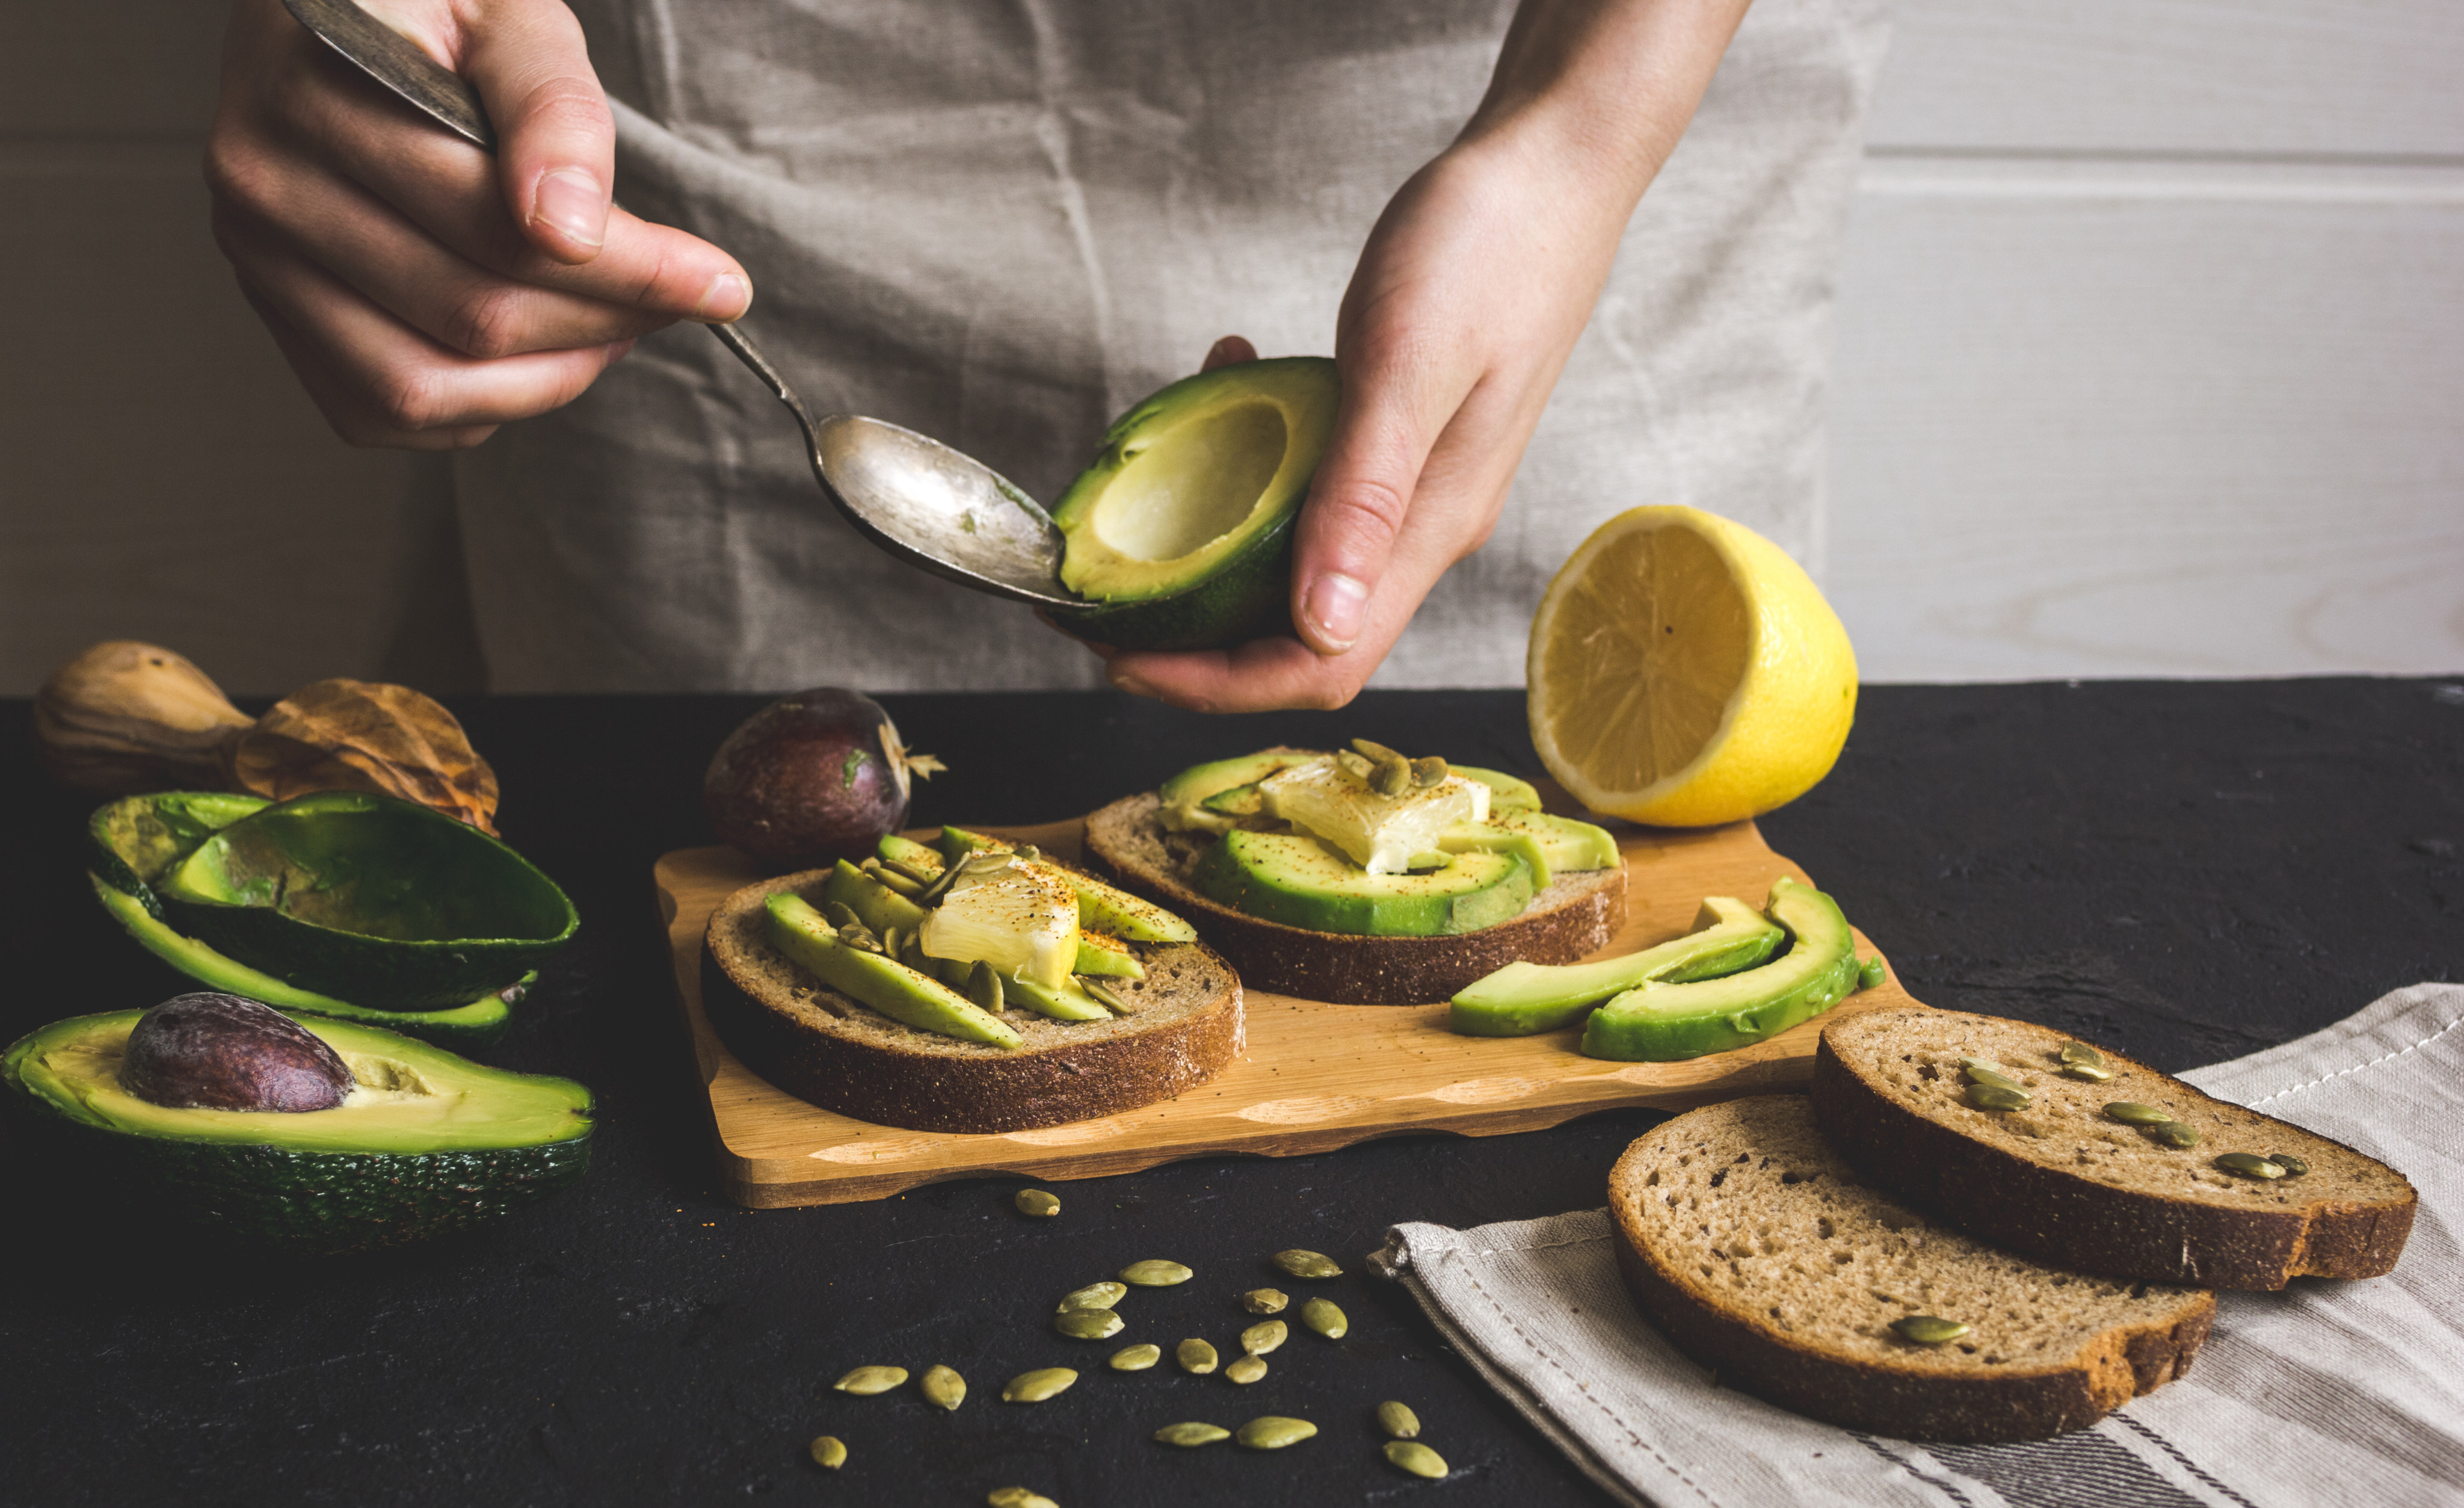 Avocado has been shown to help reduce cholesterol levels.